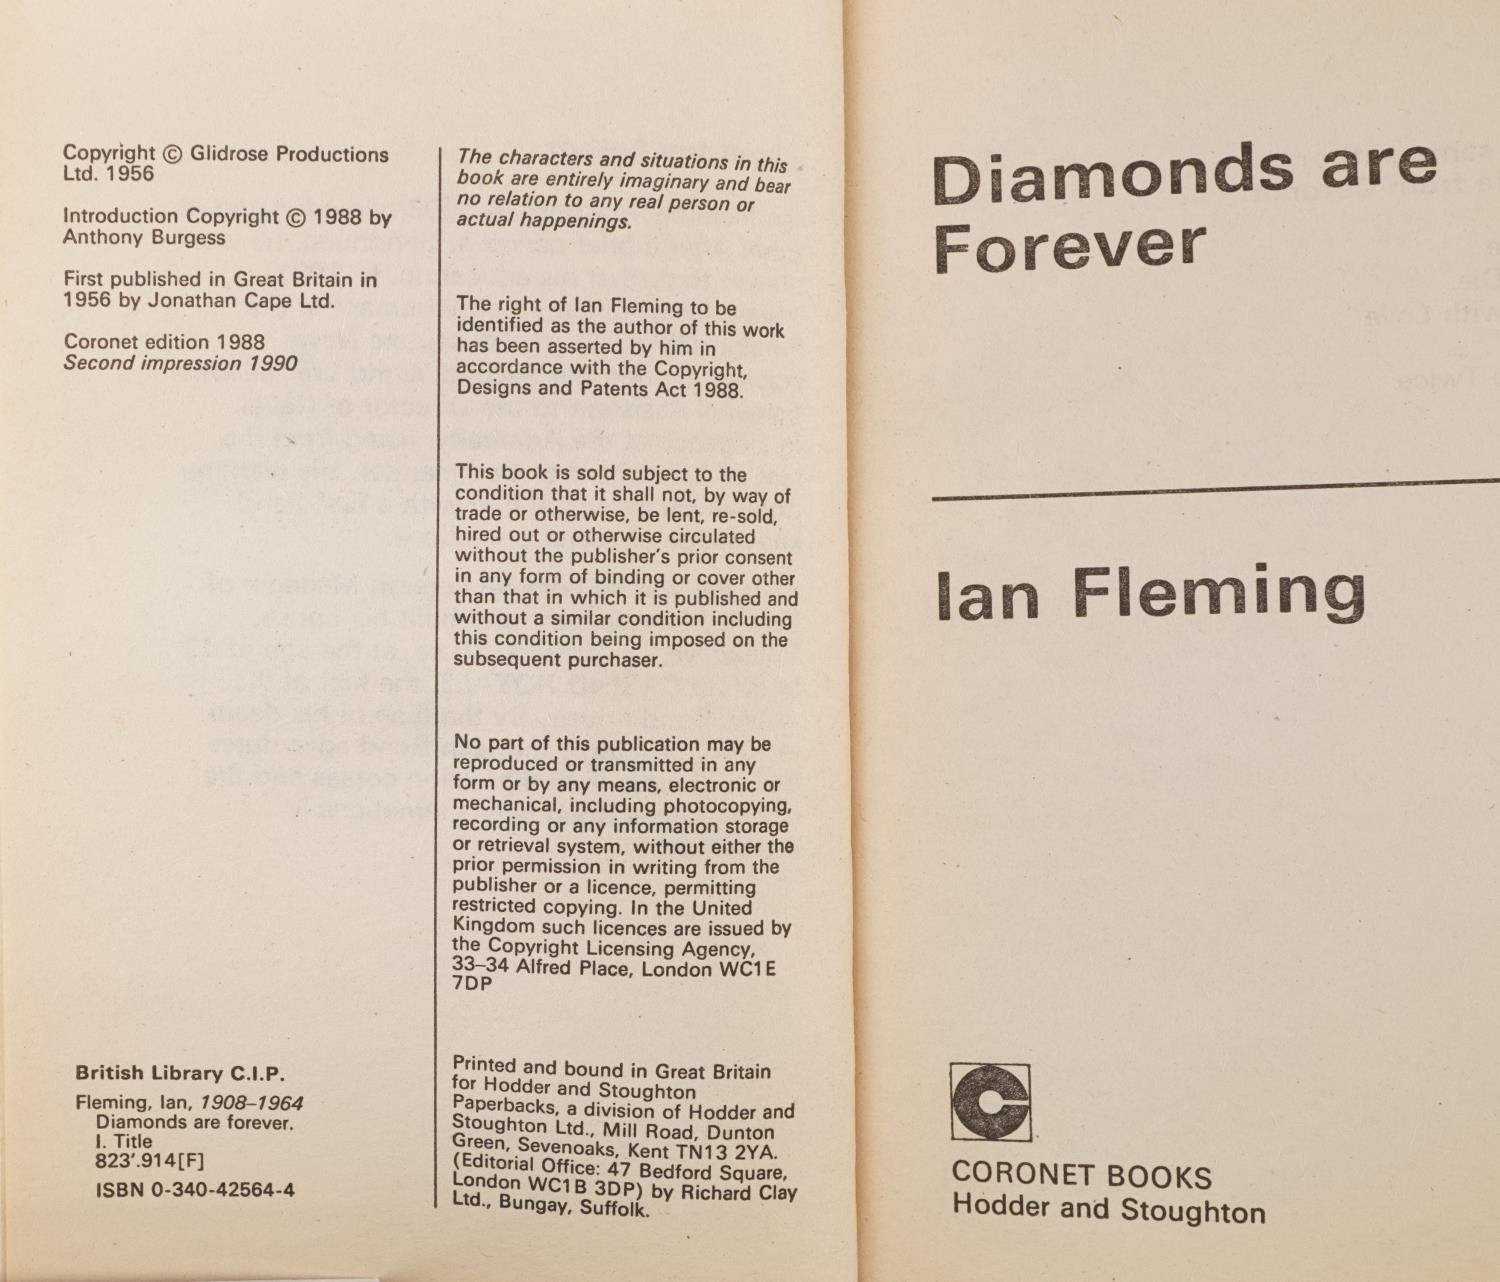 Three Ian Fleming James Bond Coronet Edition soft back books with prefaces by Anthony Burgess, - Image 2 of 3